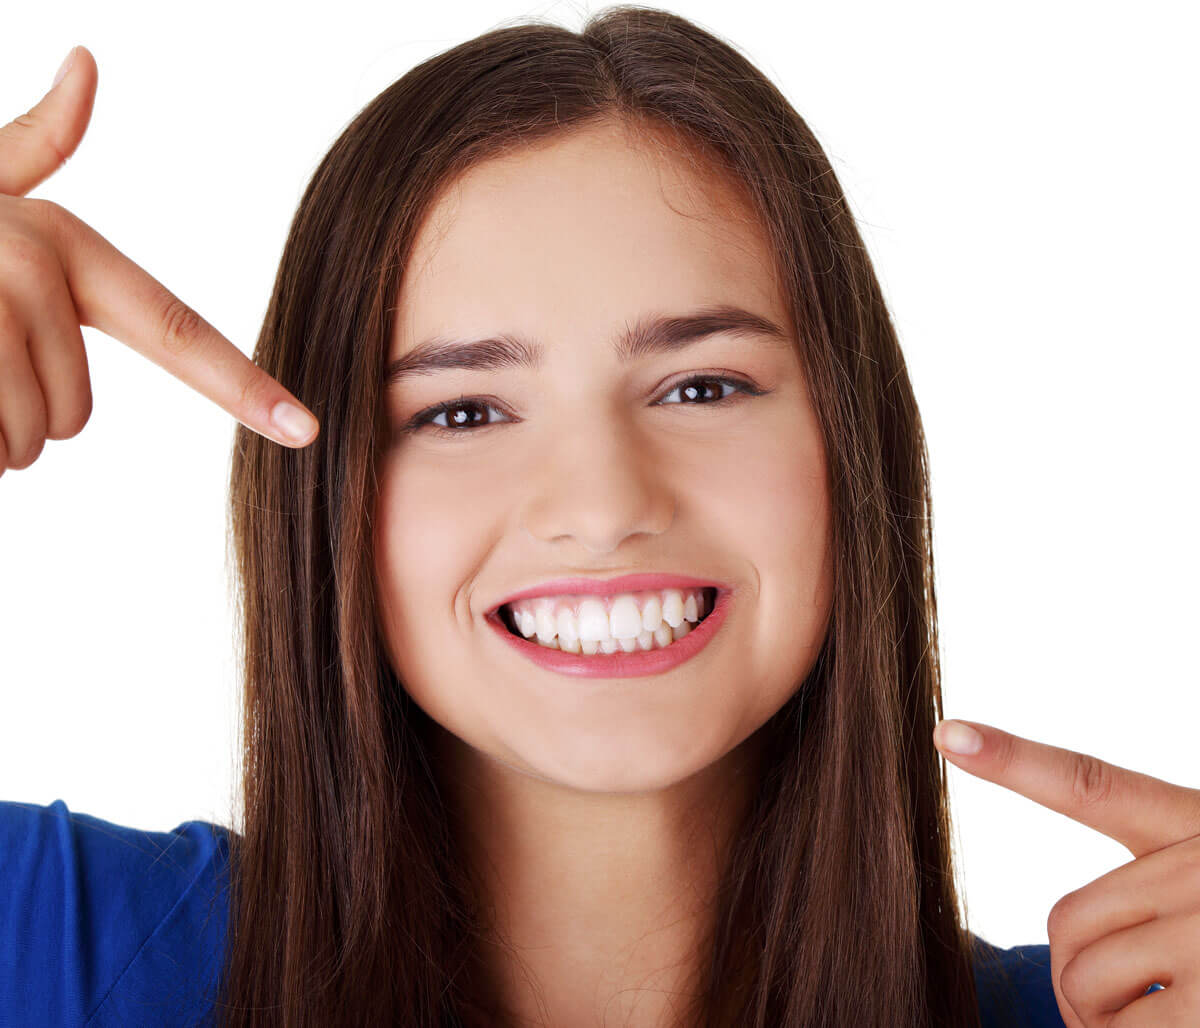 With the KöR whitening system, your Bloomington, IL dentist gets you the results you desire